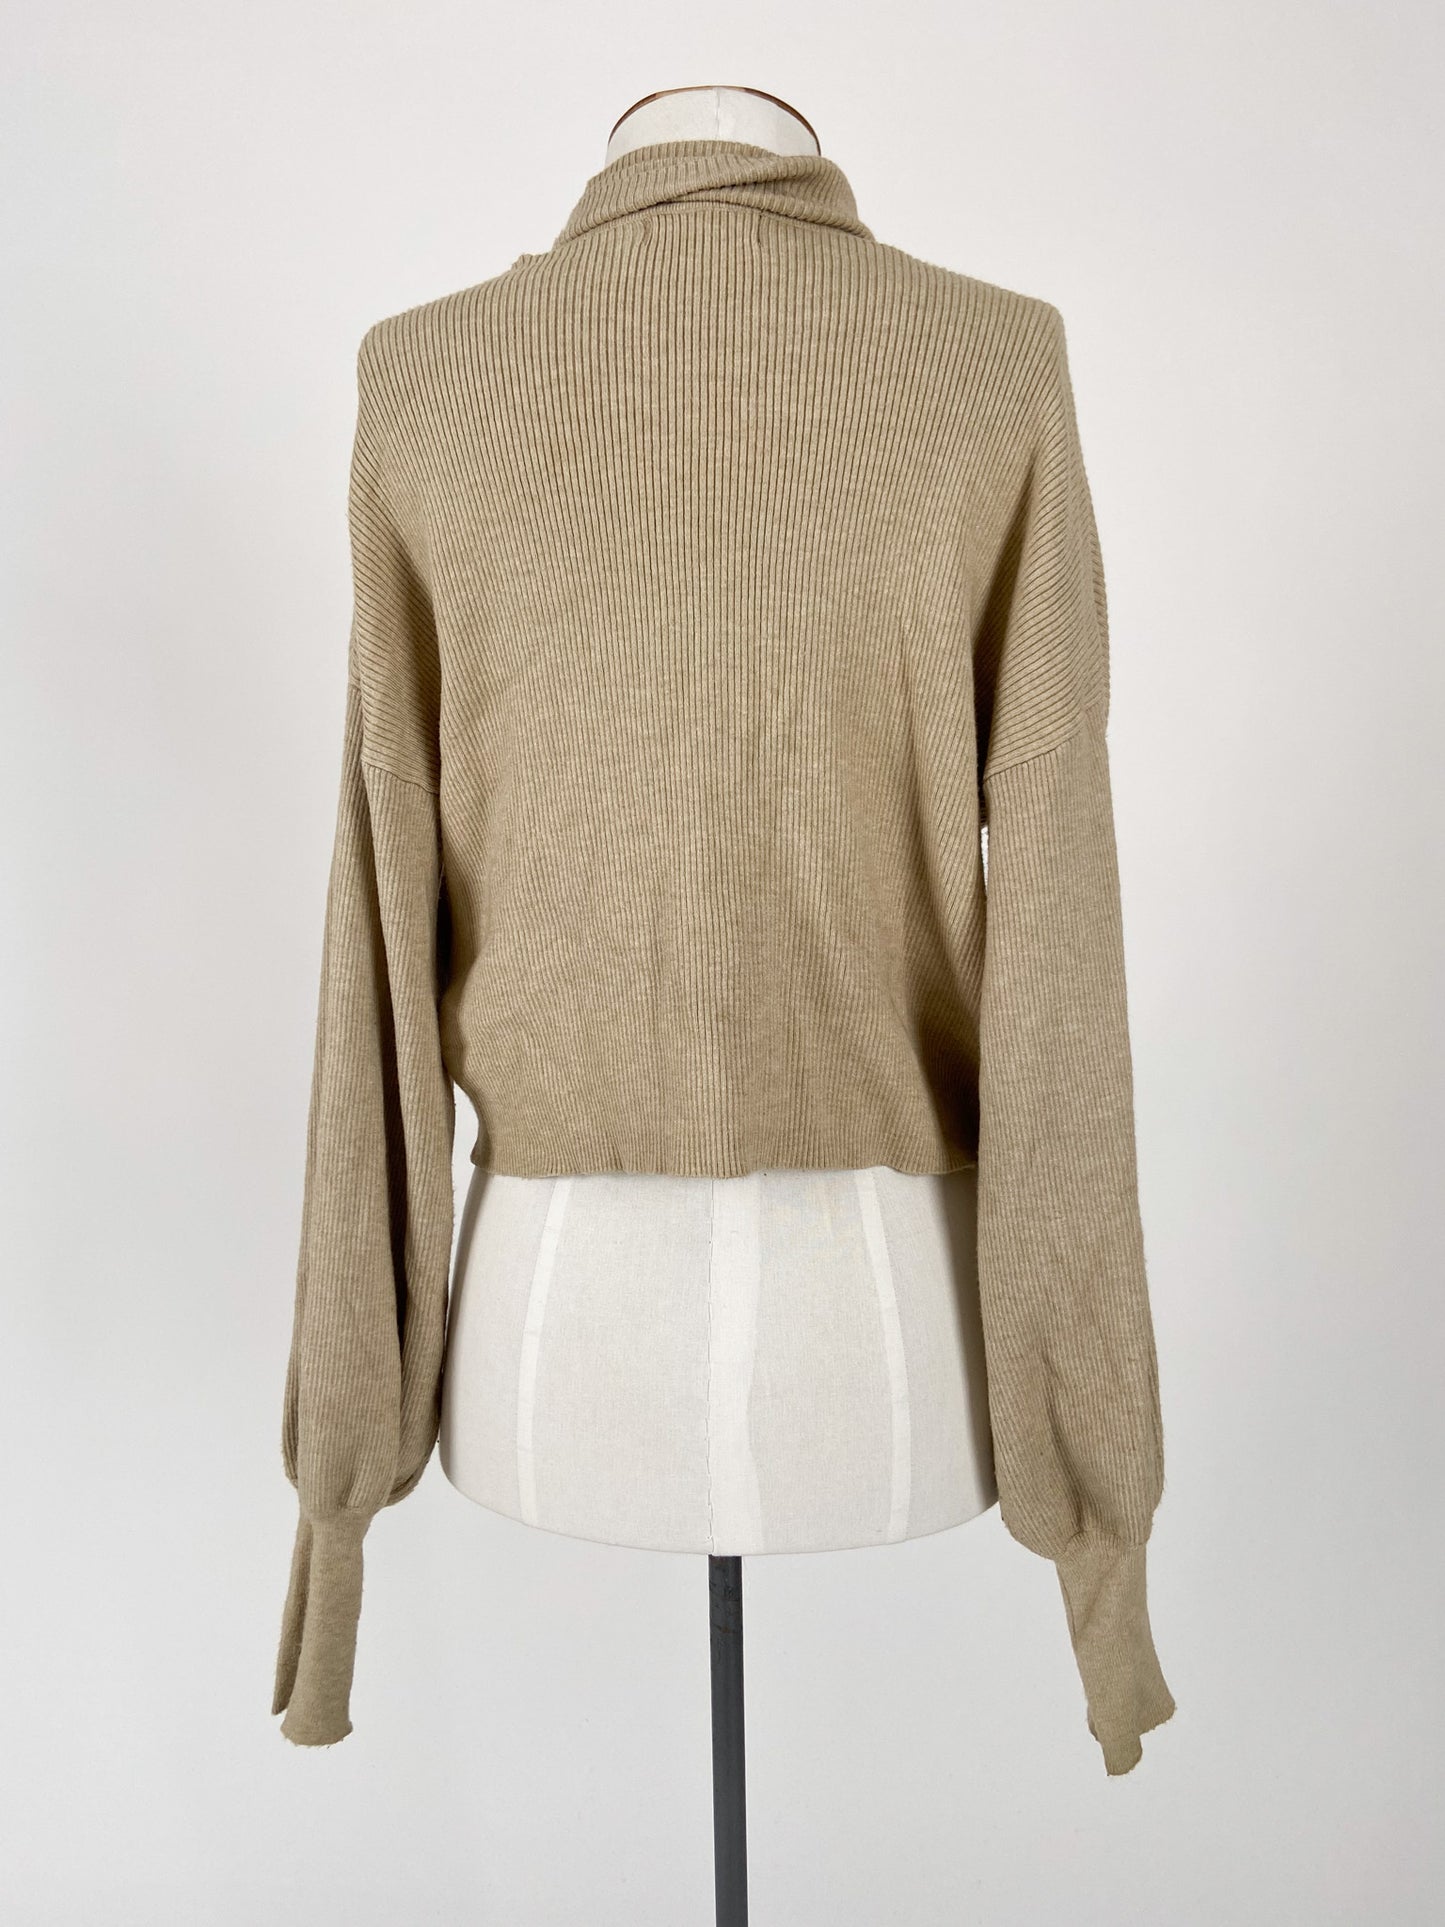 Glassons | Beige Casual Top | Size XS